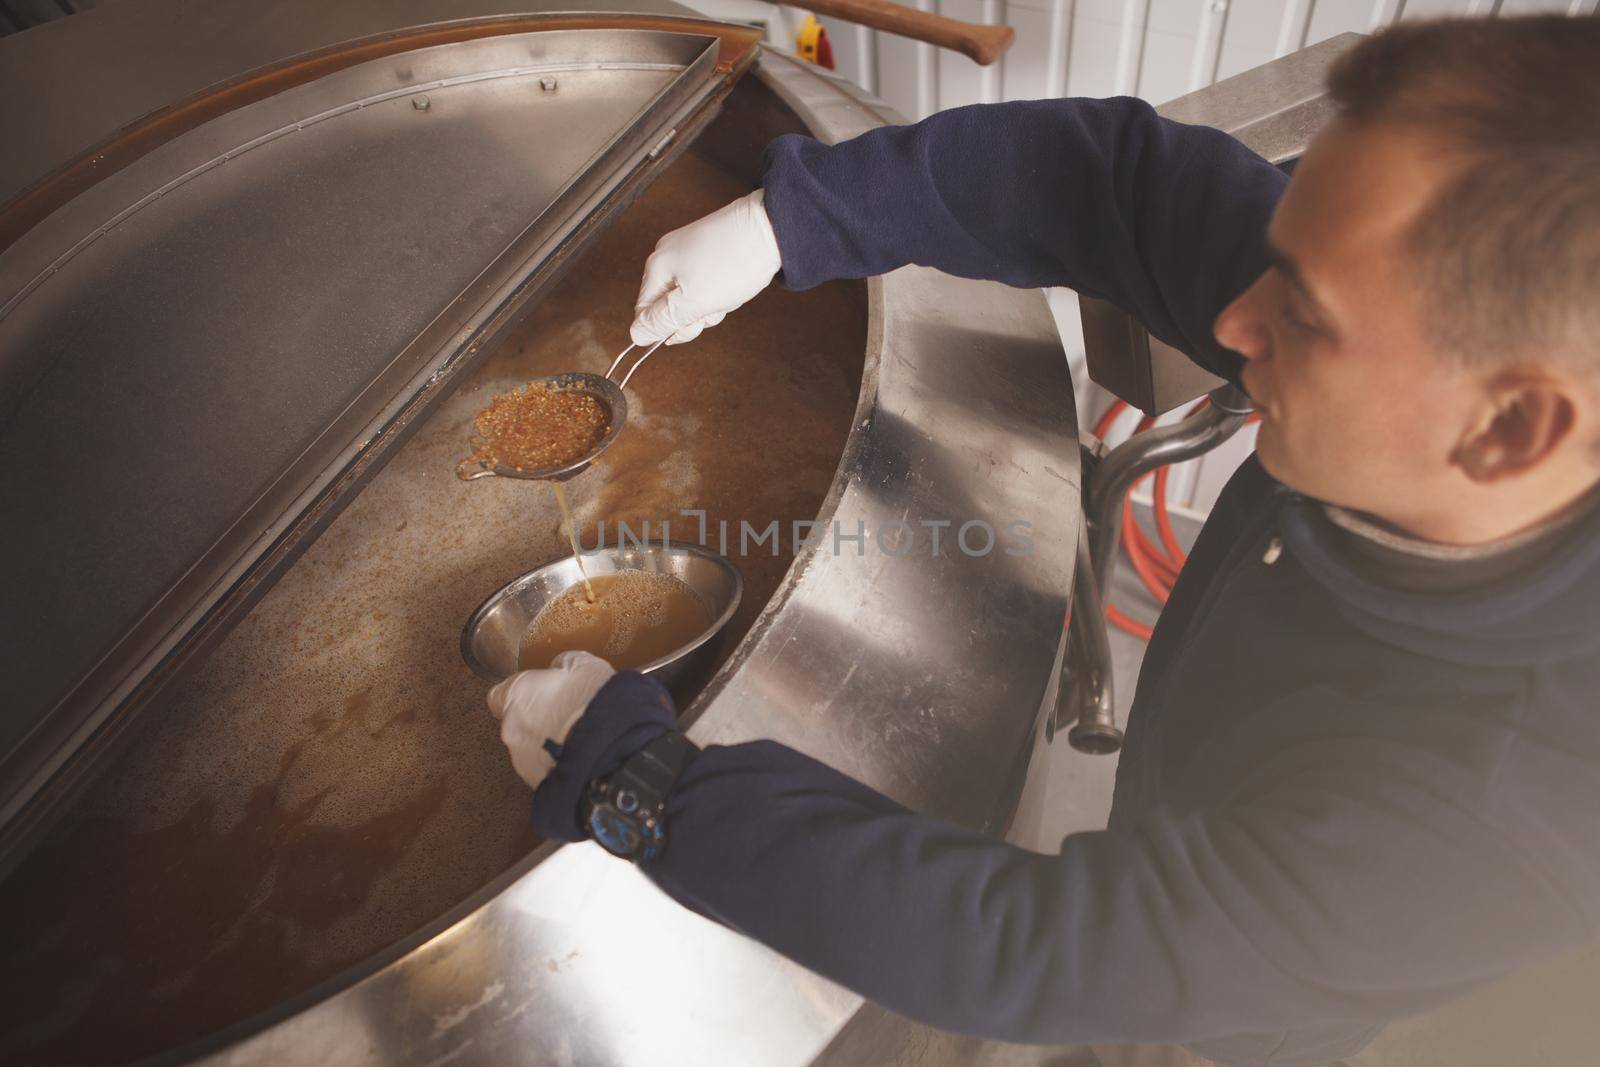 Top view shot of a man working at beer factory, examining fermenting beer in a tank